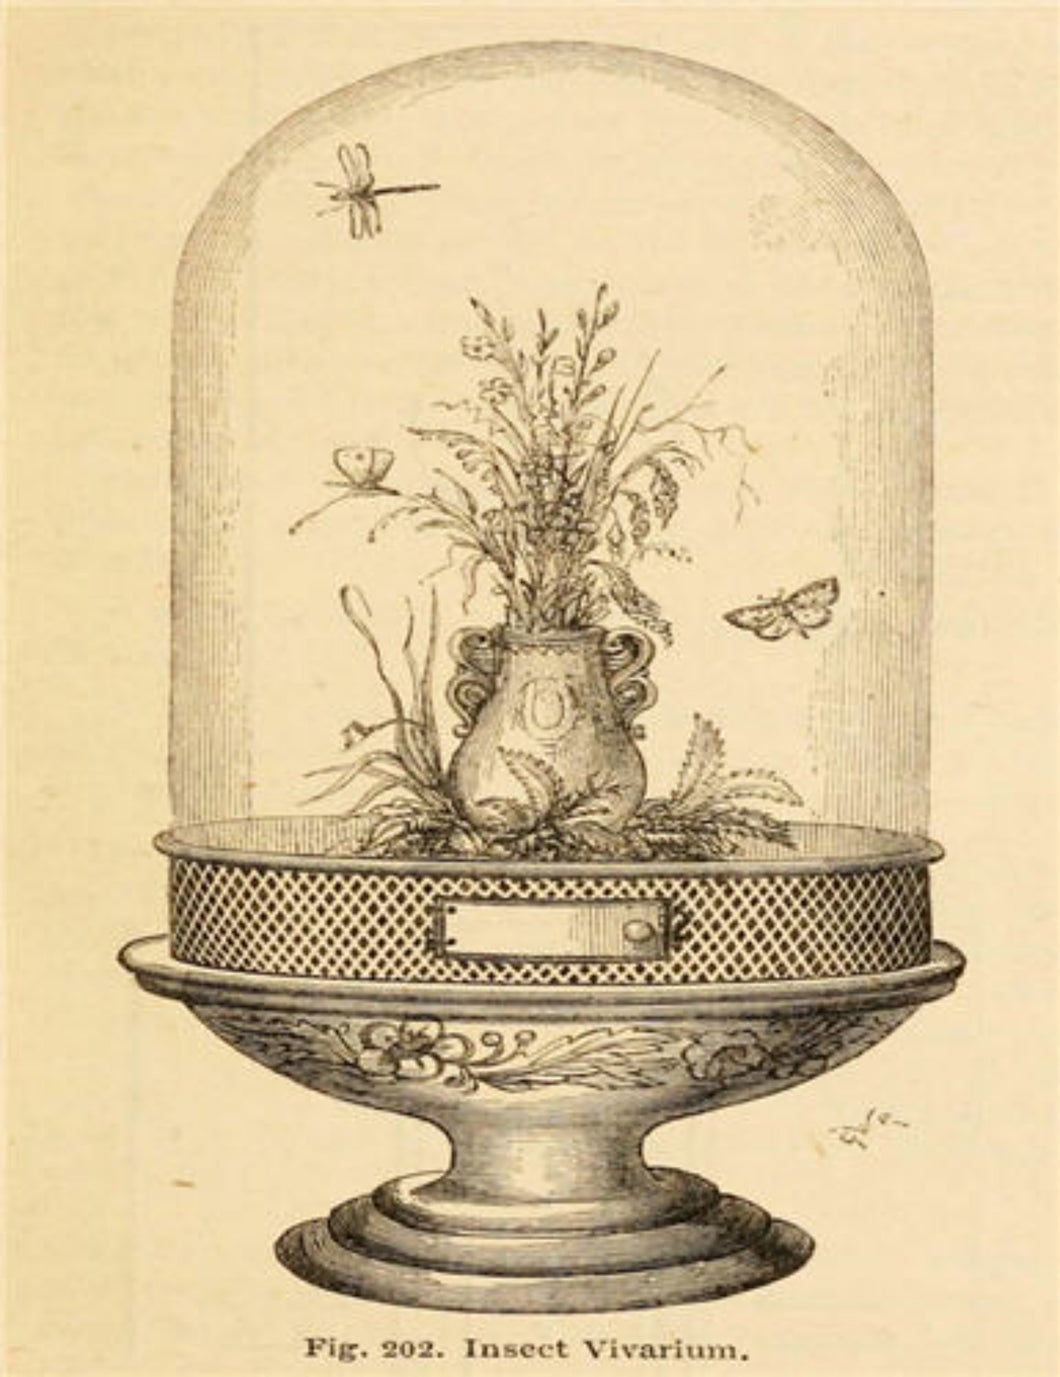 Insect Vivarium by Monahan Papers, X175